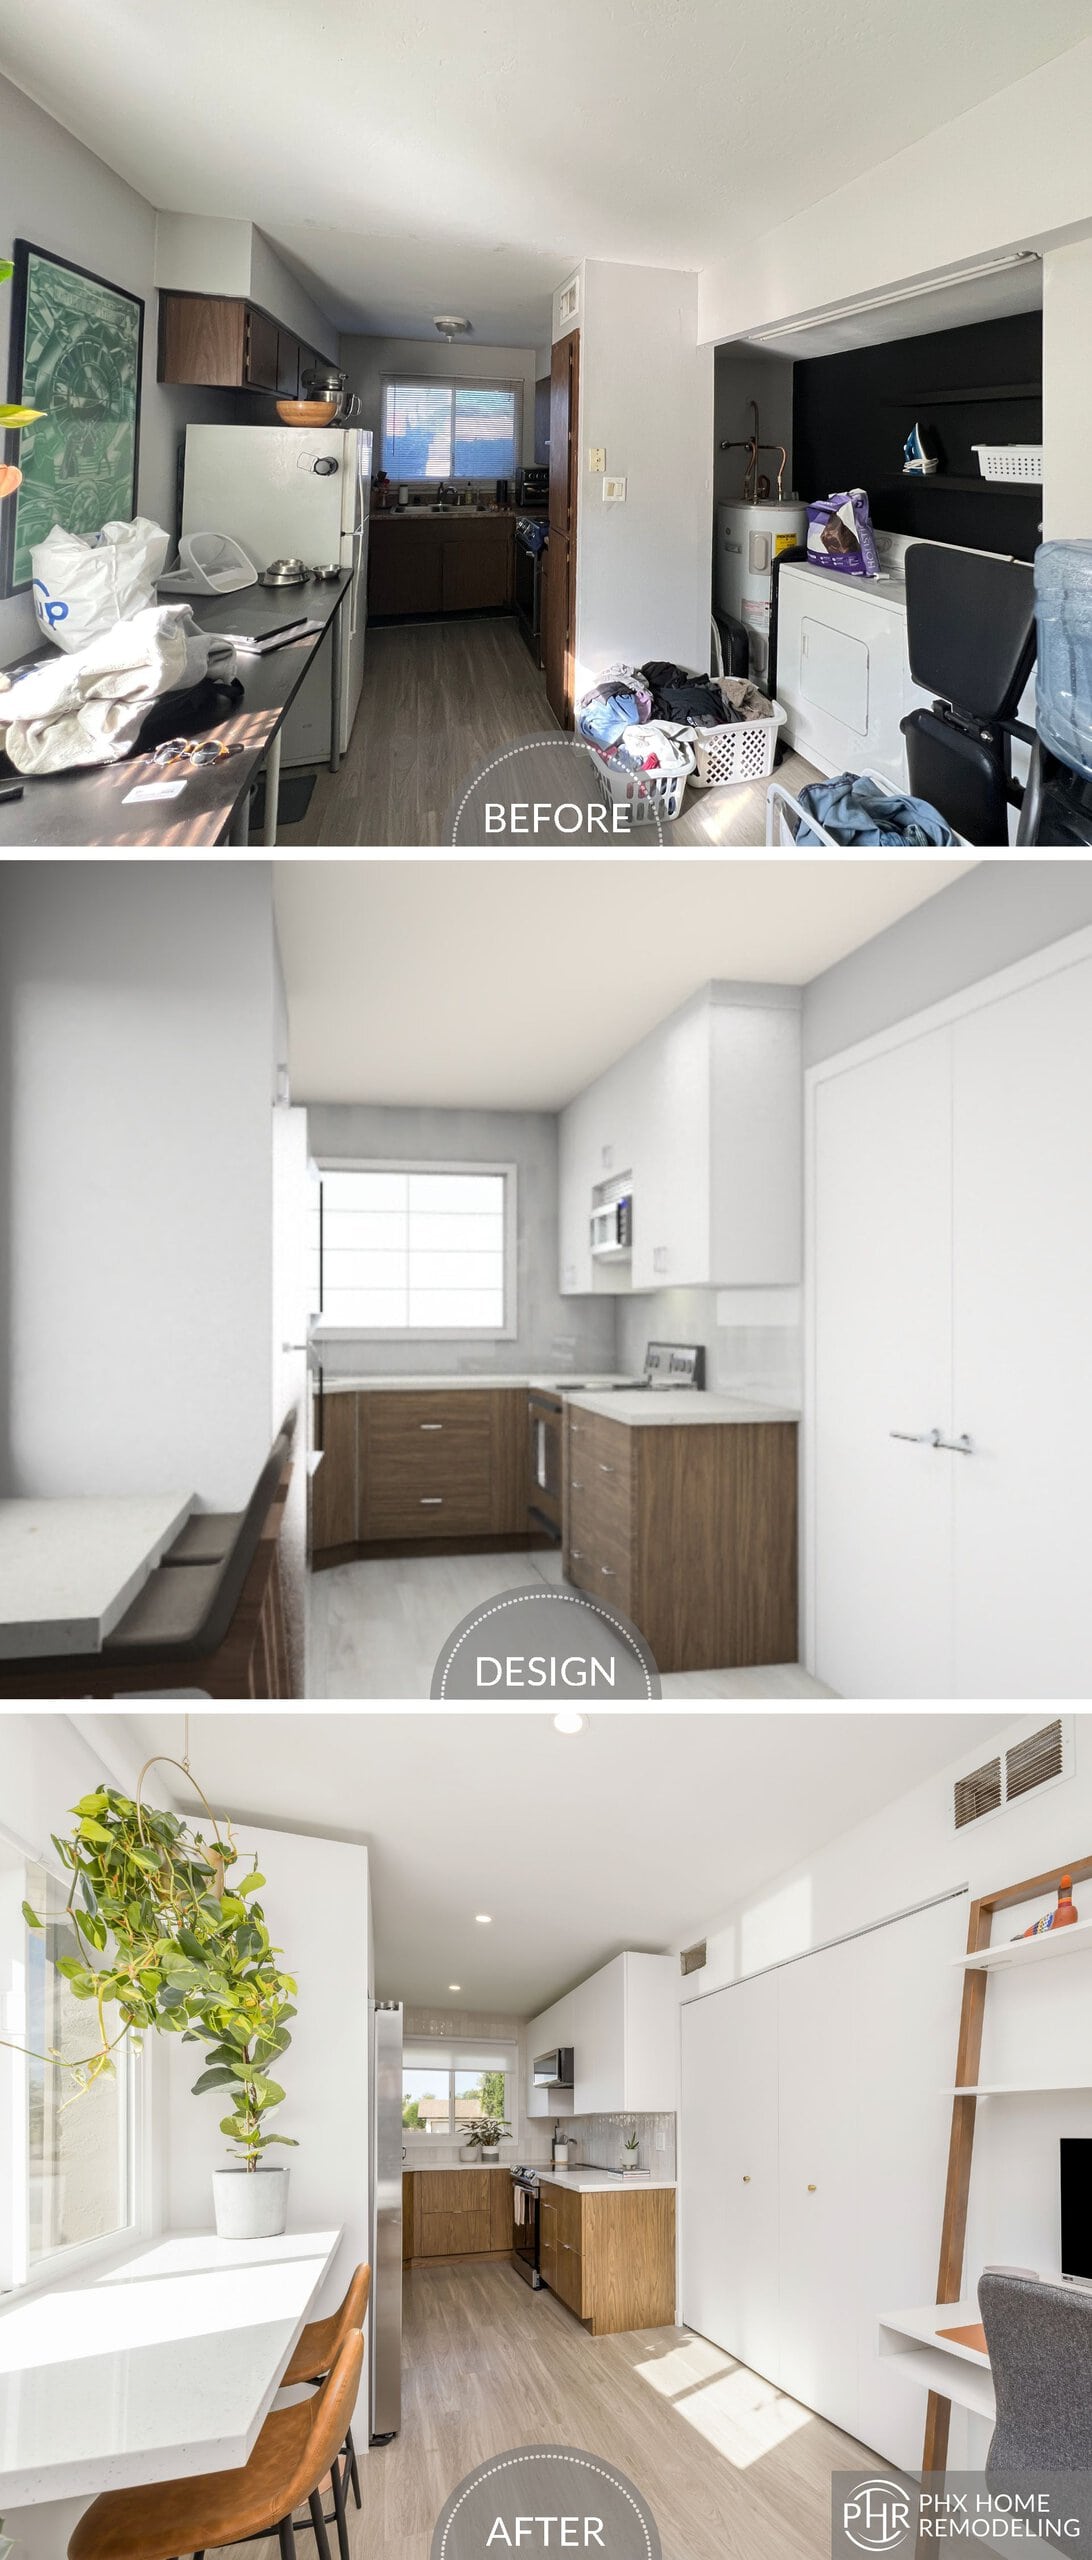 tempe kitchen going through renovation before & after photo